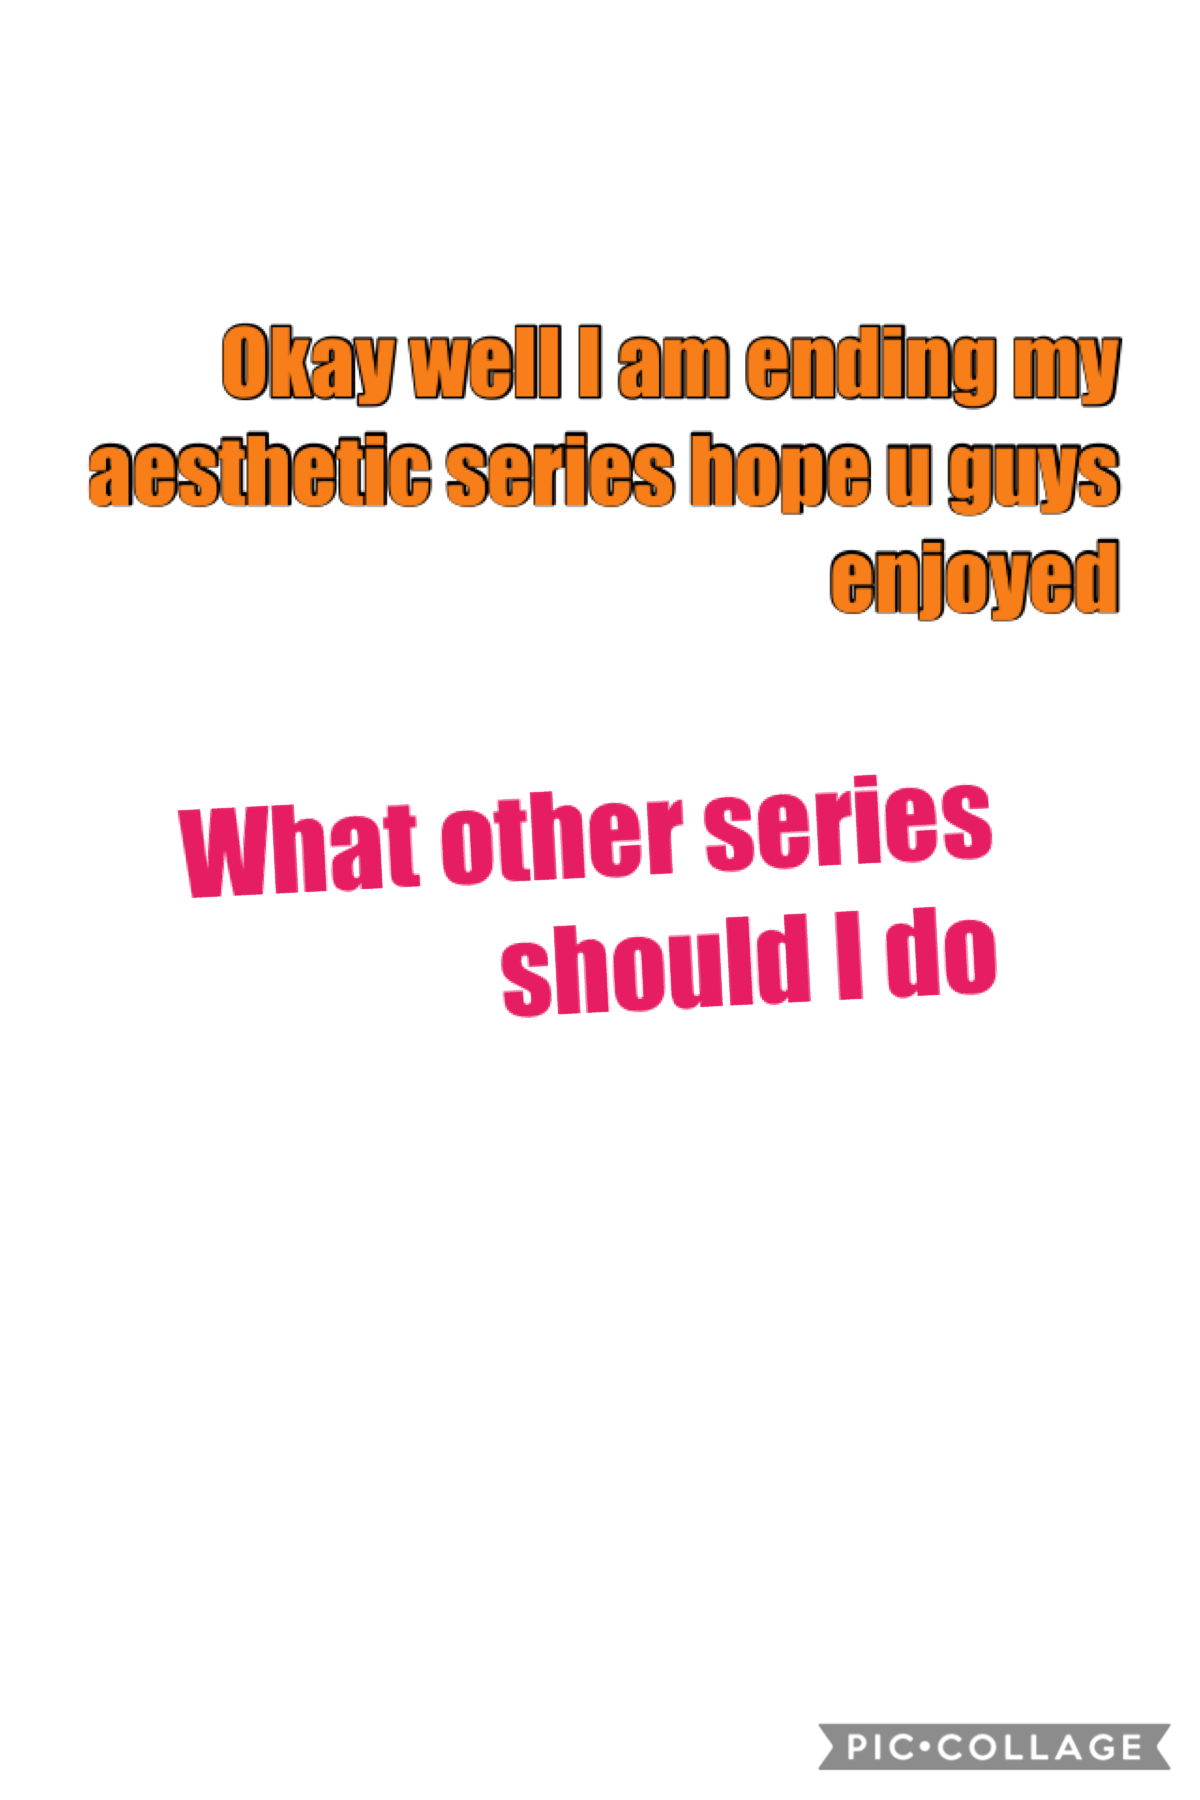 What other series